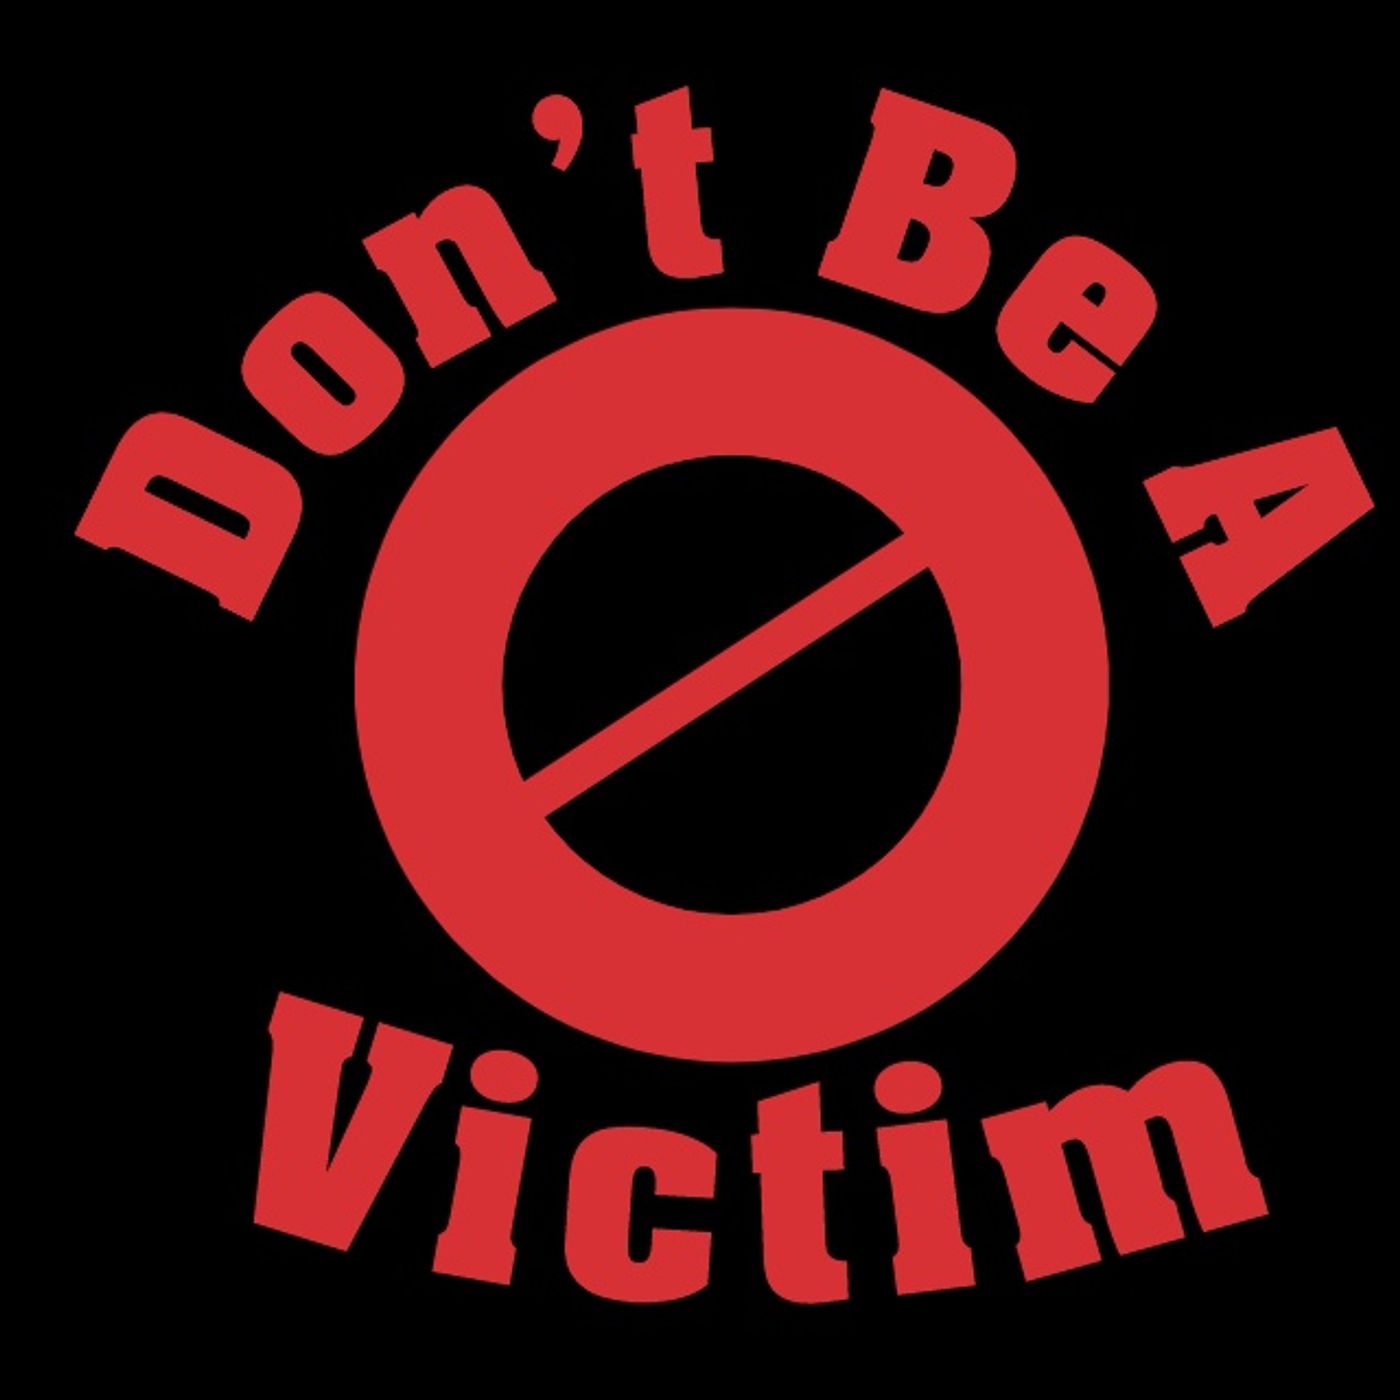 What's Your Testimony #PODCAST #74 Don't Be a Victim: Human Tarfficking